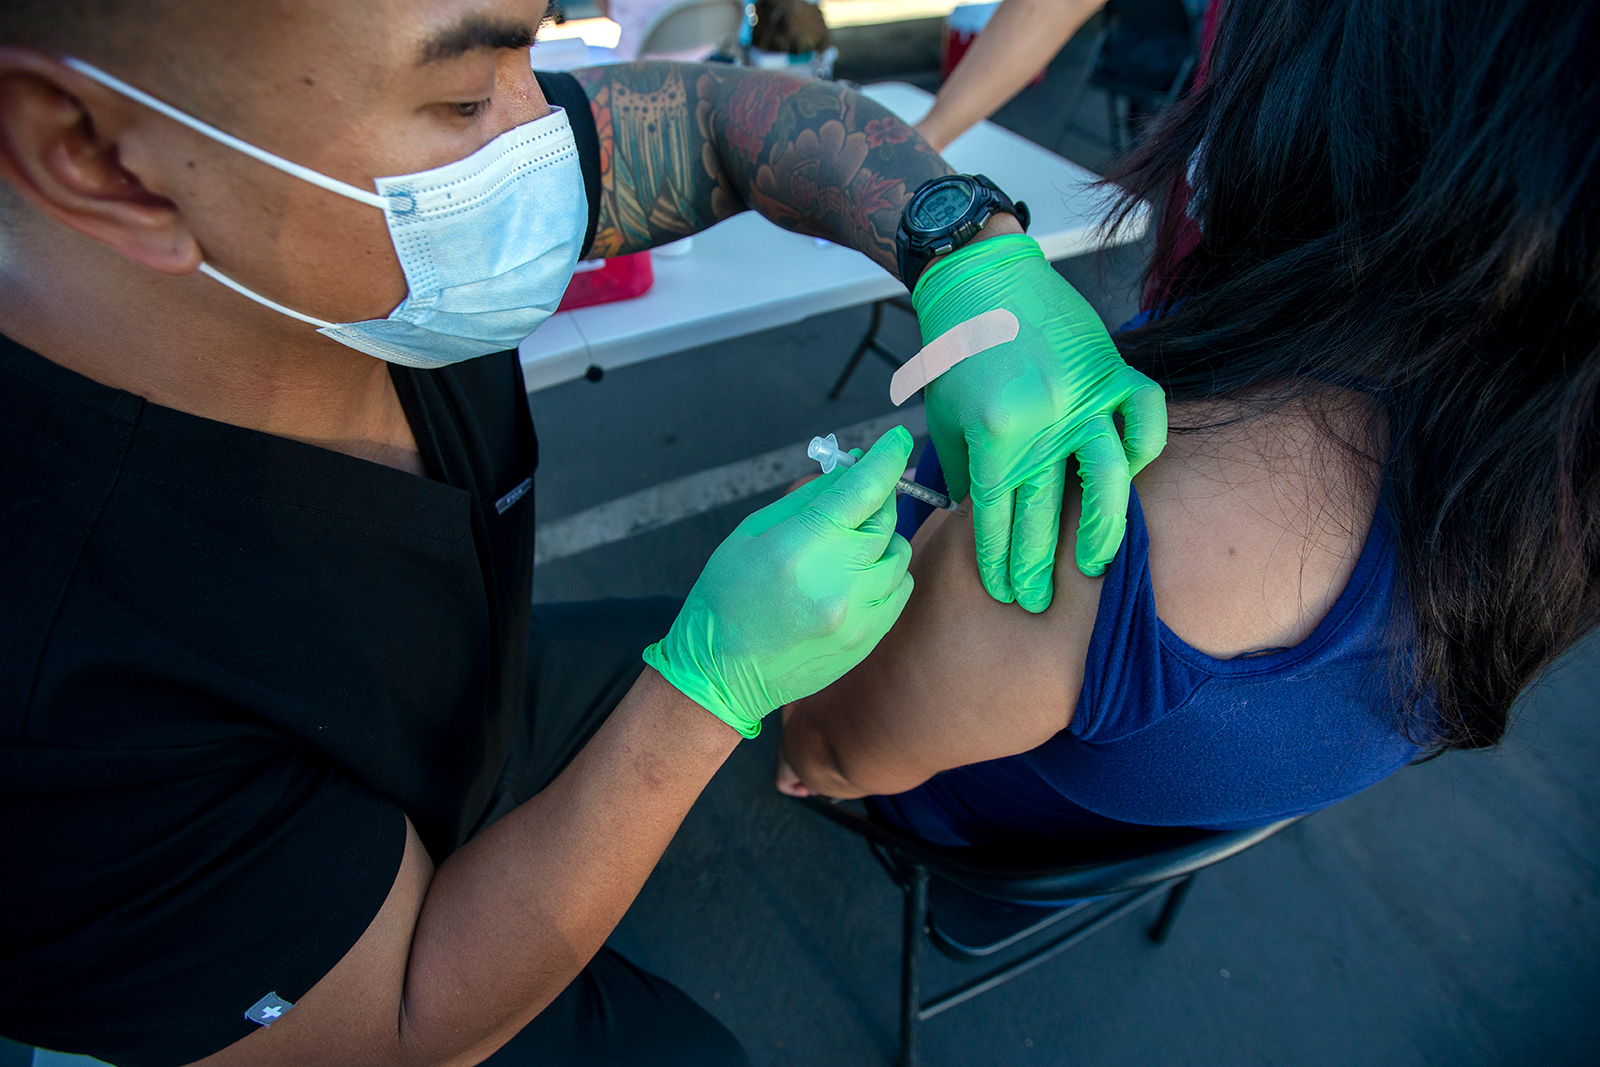 Marc Ocampo administers a vaccine to DIana Vuevas at a Covid-19 vaccination clinic Long Beach City College Pacific Coast Campus. on Tuesday, July 6, 2021 in Long Beach, California.